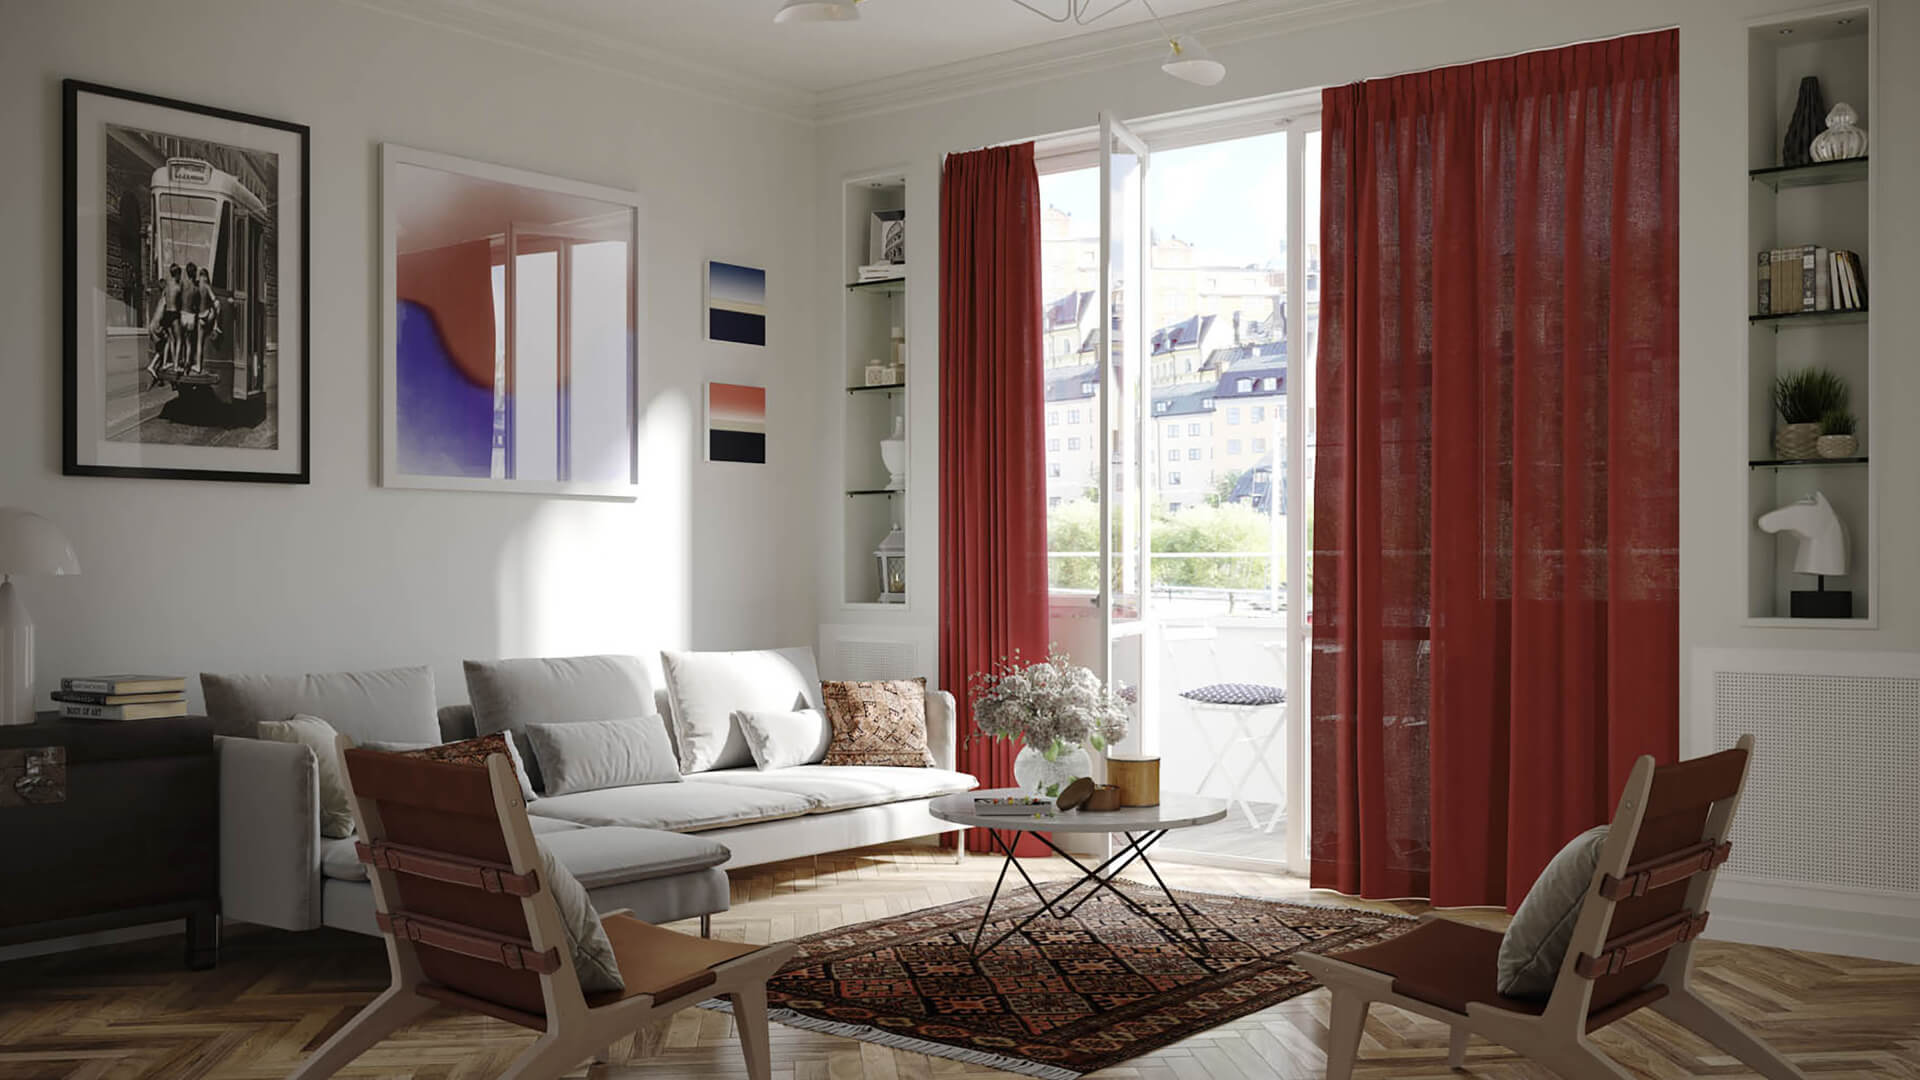 Blog IDW - How to give a new look to your apartment using fabric